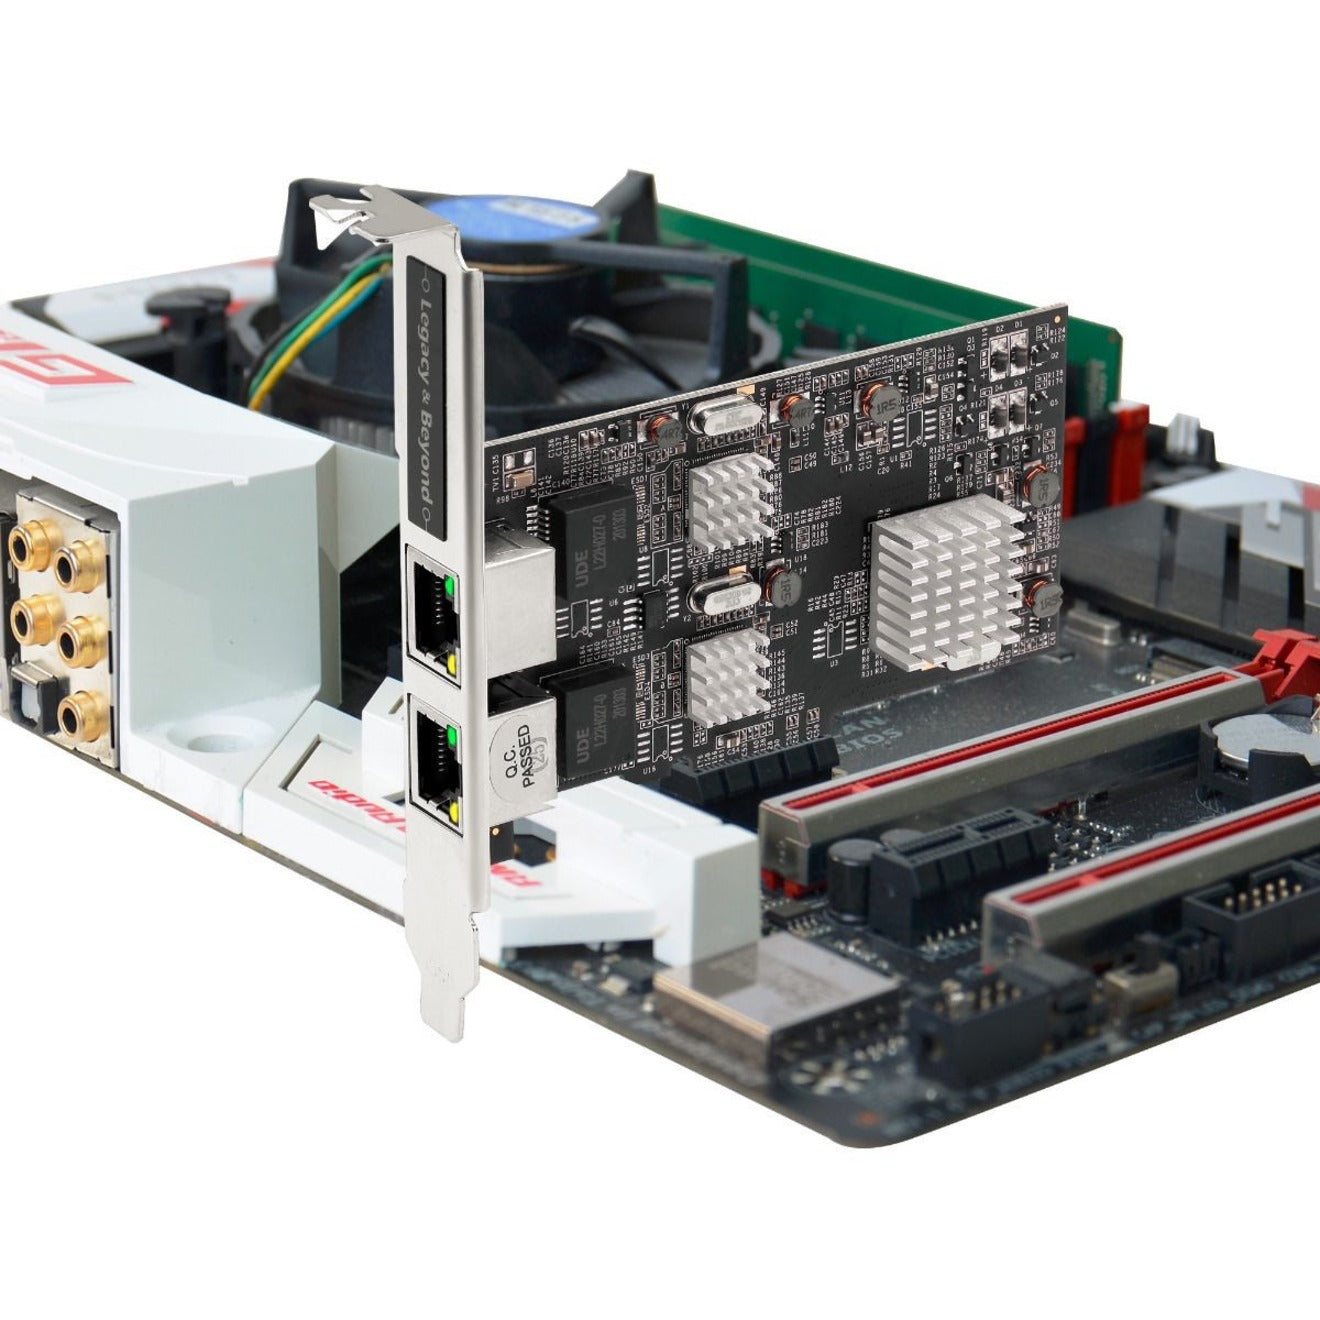 SIIG LB-GE0711-S1 Dual 2.5G 4-Speed Multi-Gigabit Ethernet PCIe Card, High-Speed Network Connectivity